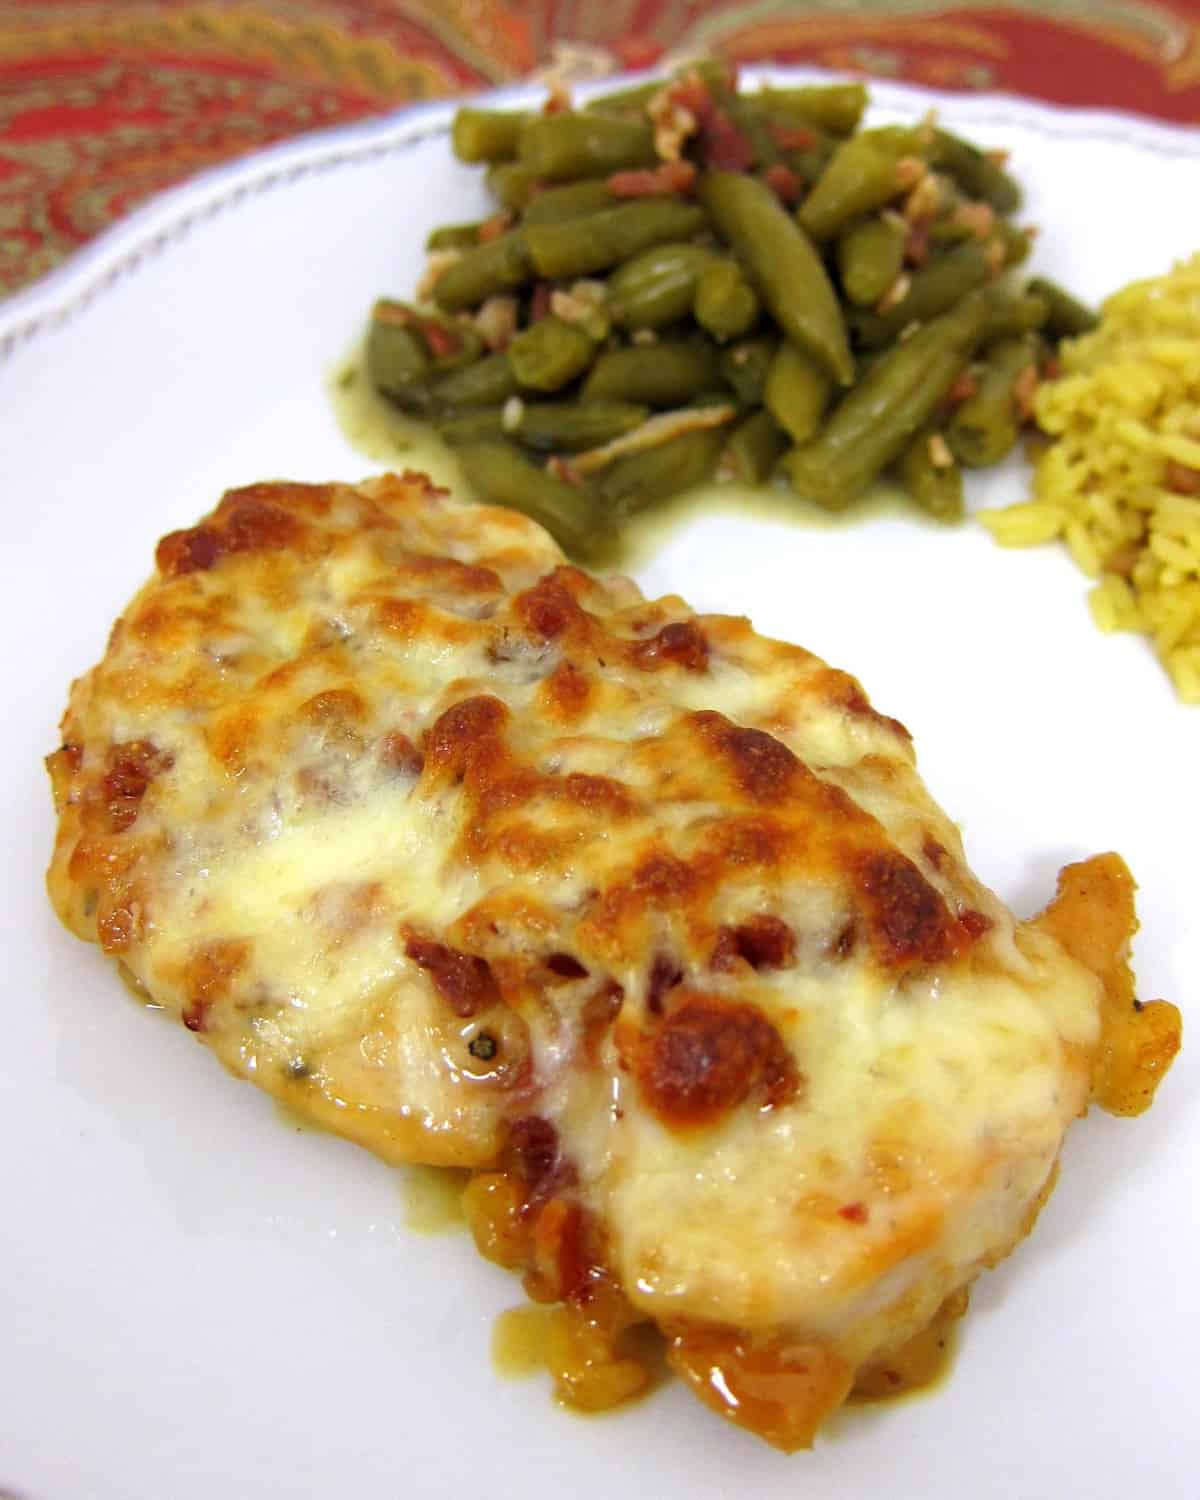 Cheesy Honey Mustard Chicken - TO DIE FOR!!! Chicken topped with honey, mustard, lemon juice, paprika, lemon pepper, bacon, Mozzarella and baked. Ready in under 30 minutes. We ate this two nights in a row. It is that good. Even picky eaters love this!